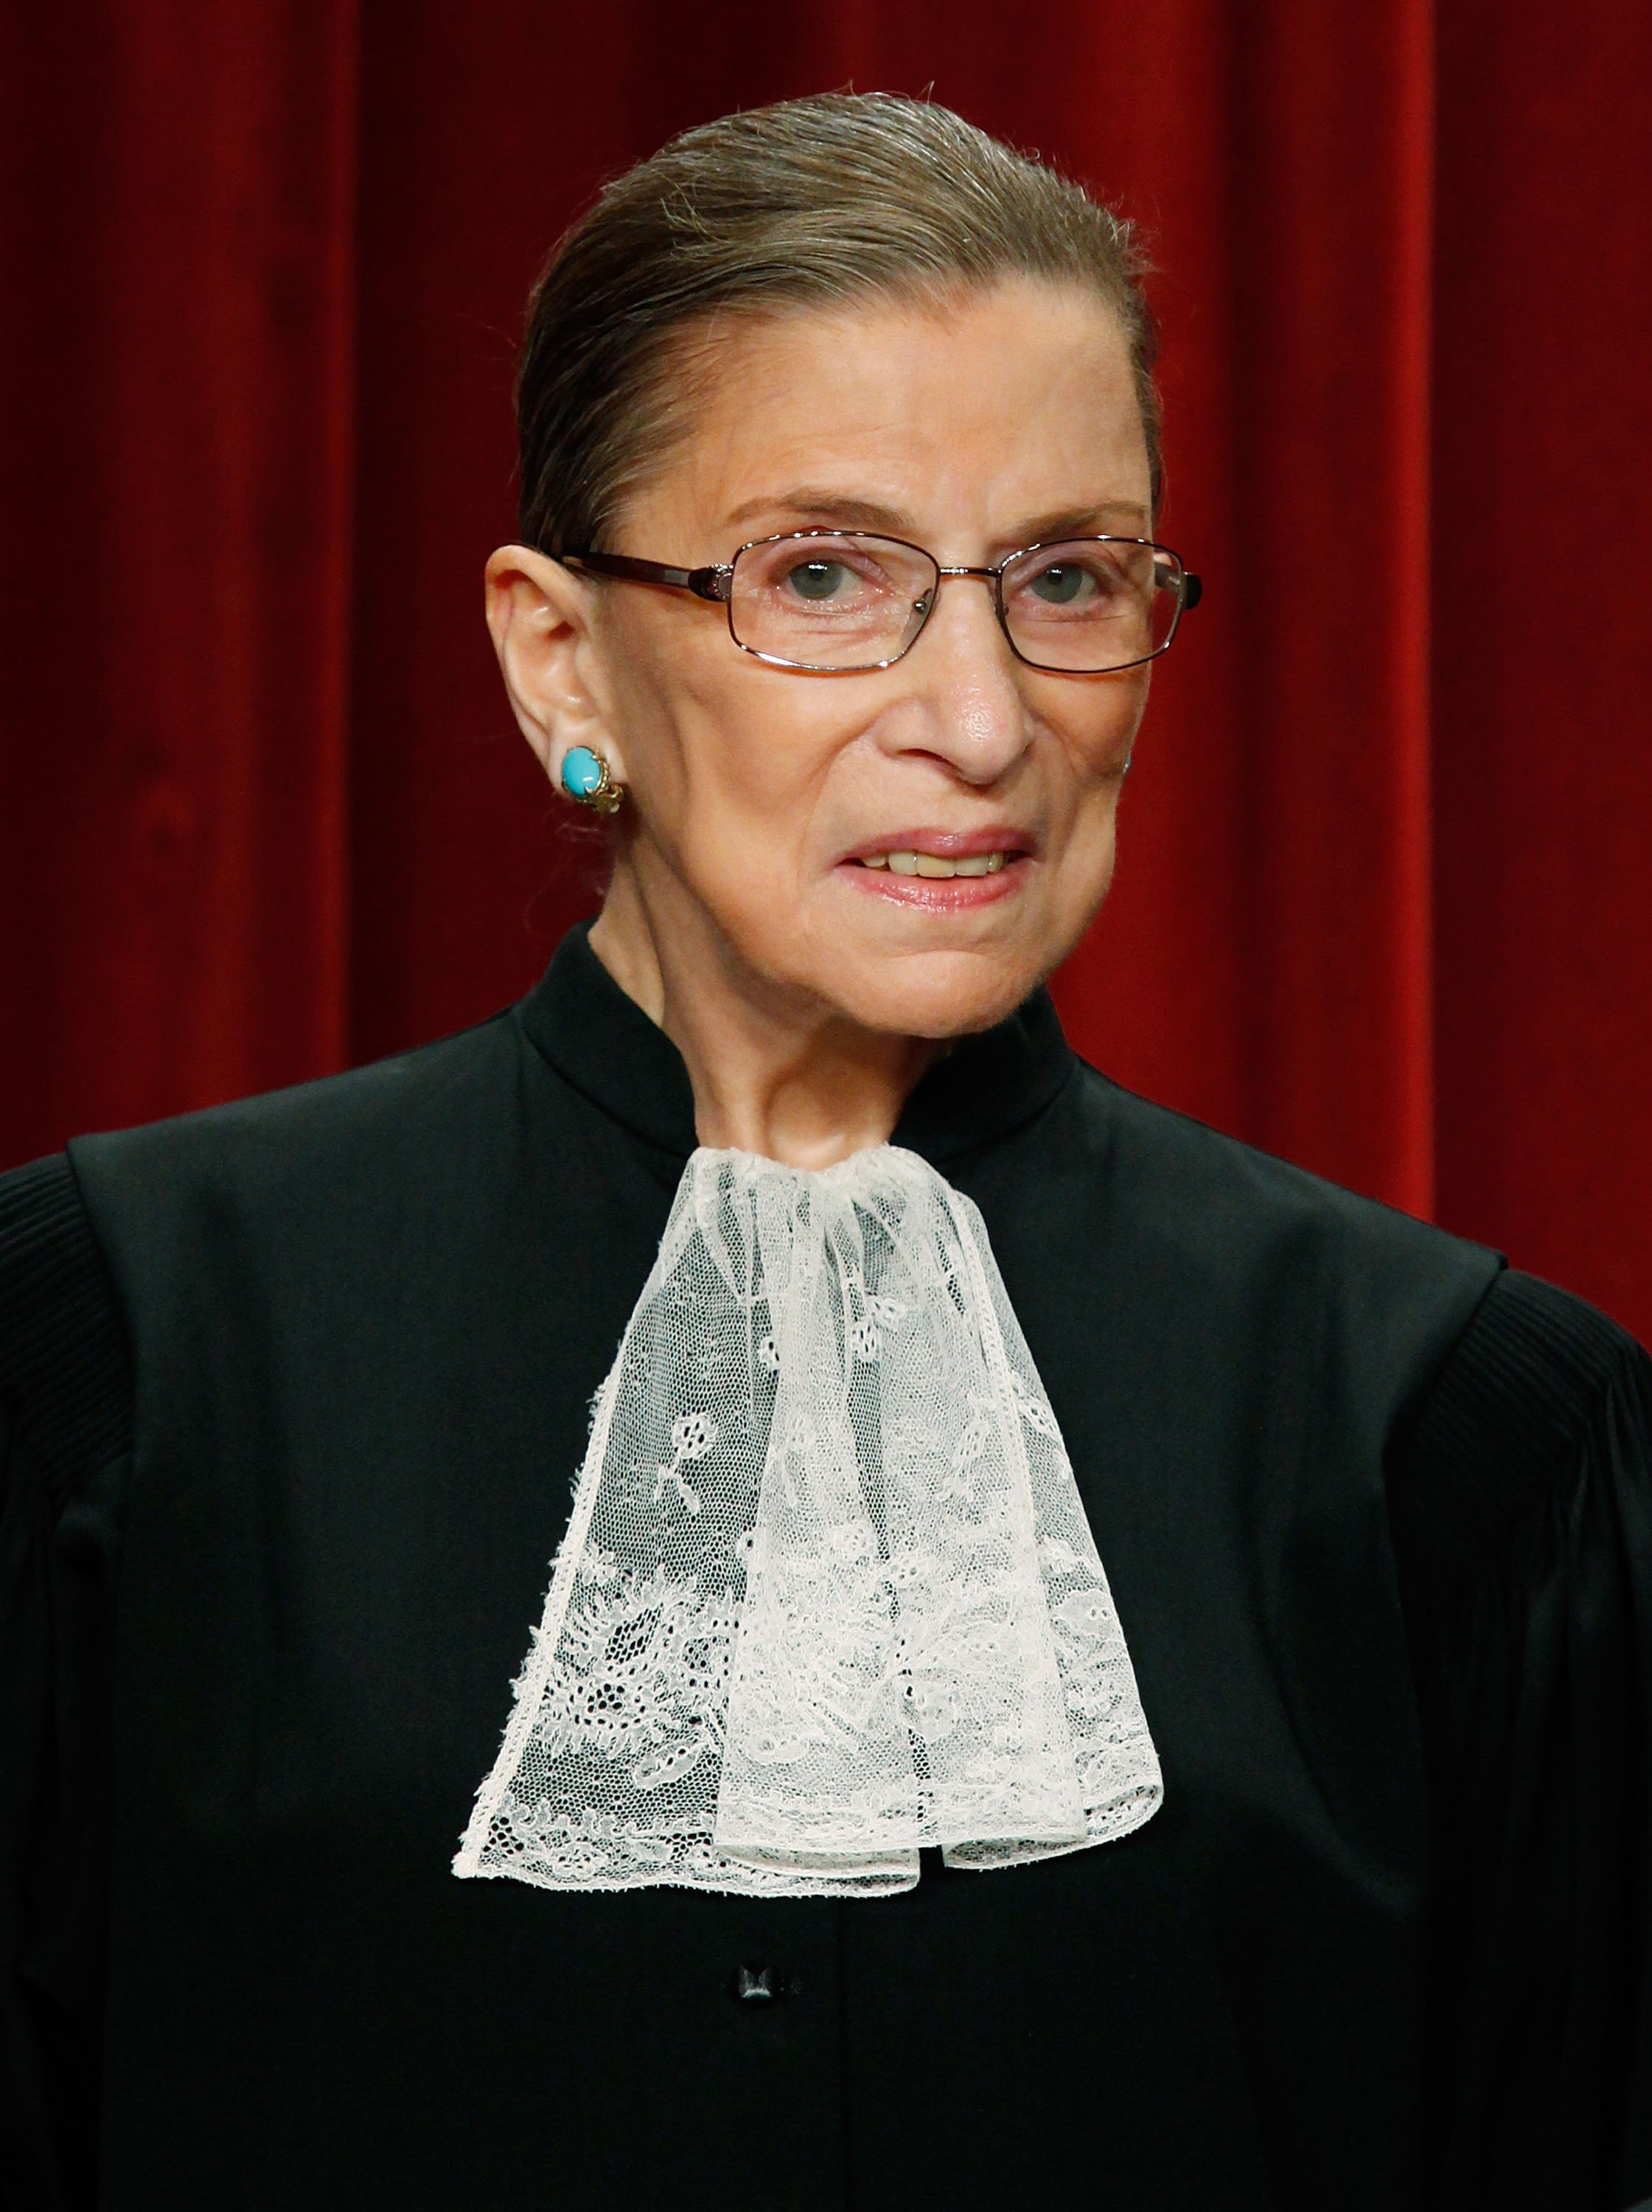 Justice Ruth Bader Ginsburg at the Supreme Court building on September 29, 2009 in Washington, DC | Photo: Getty Images